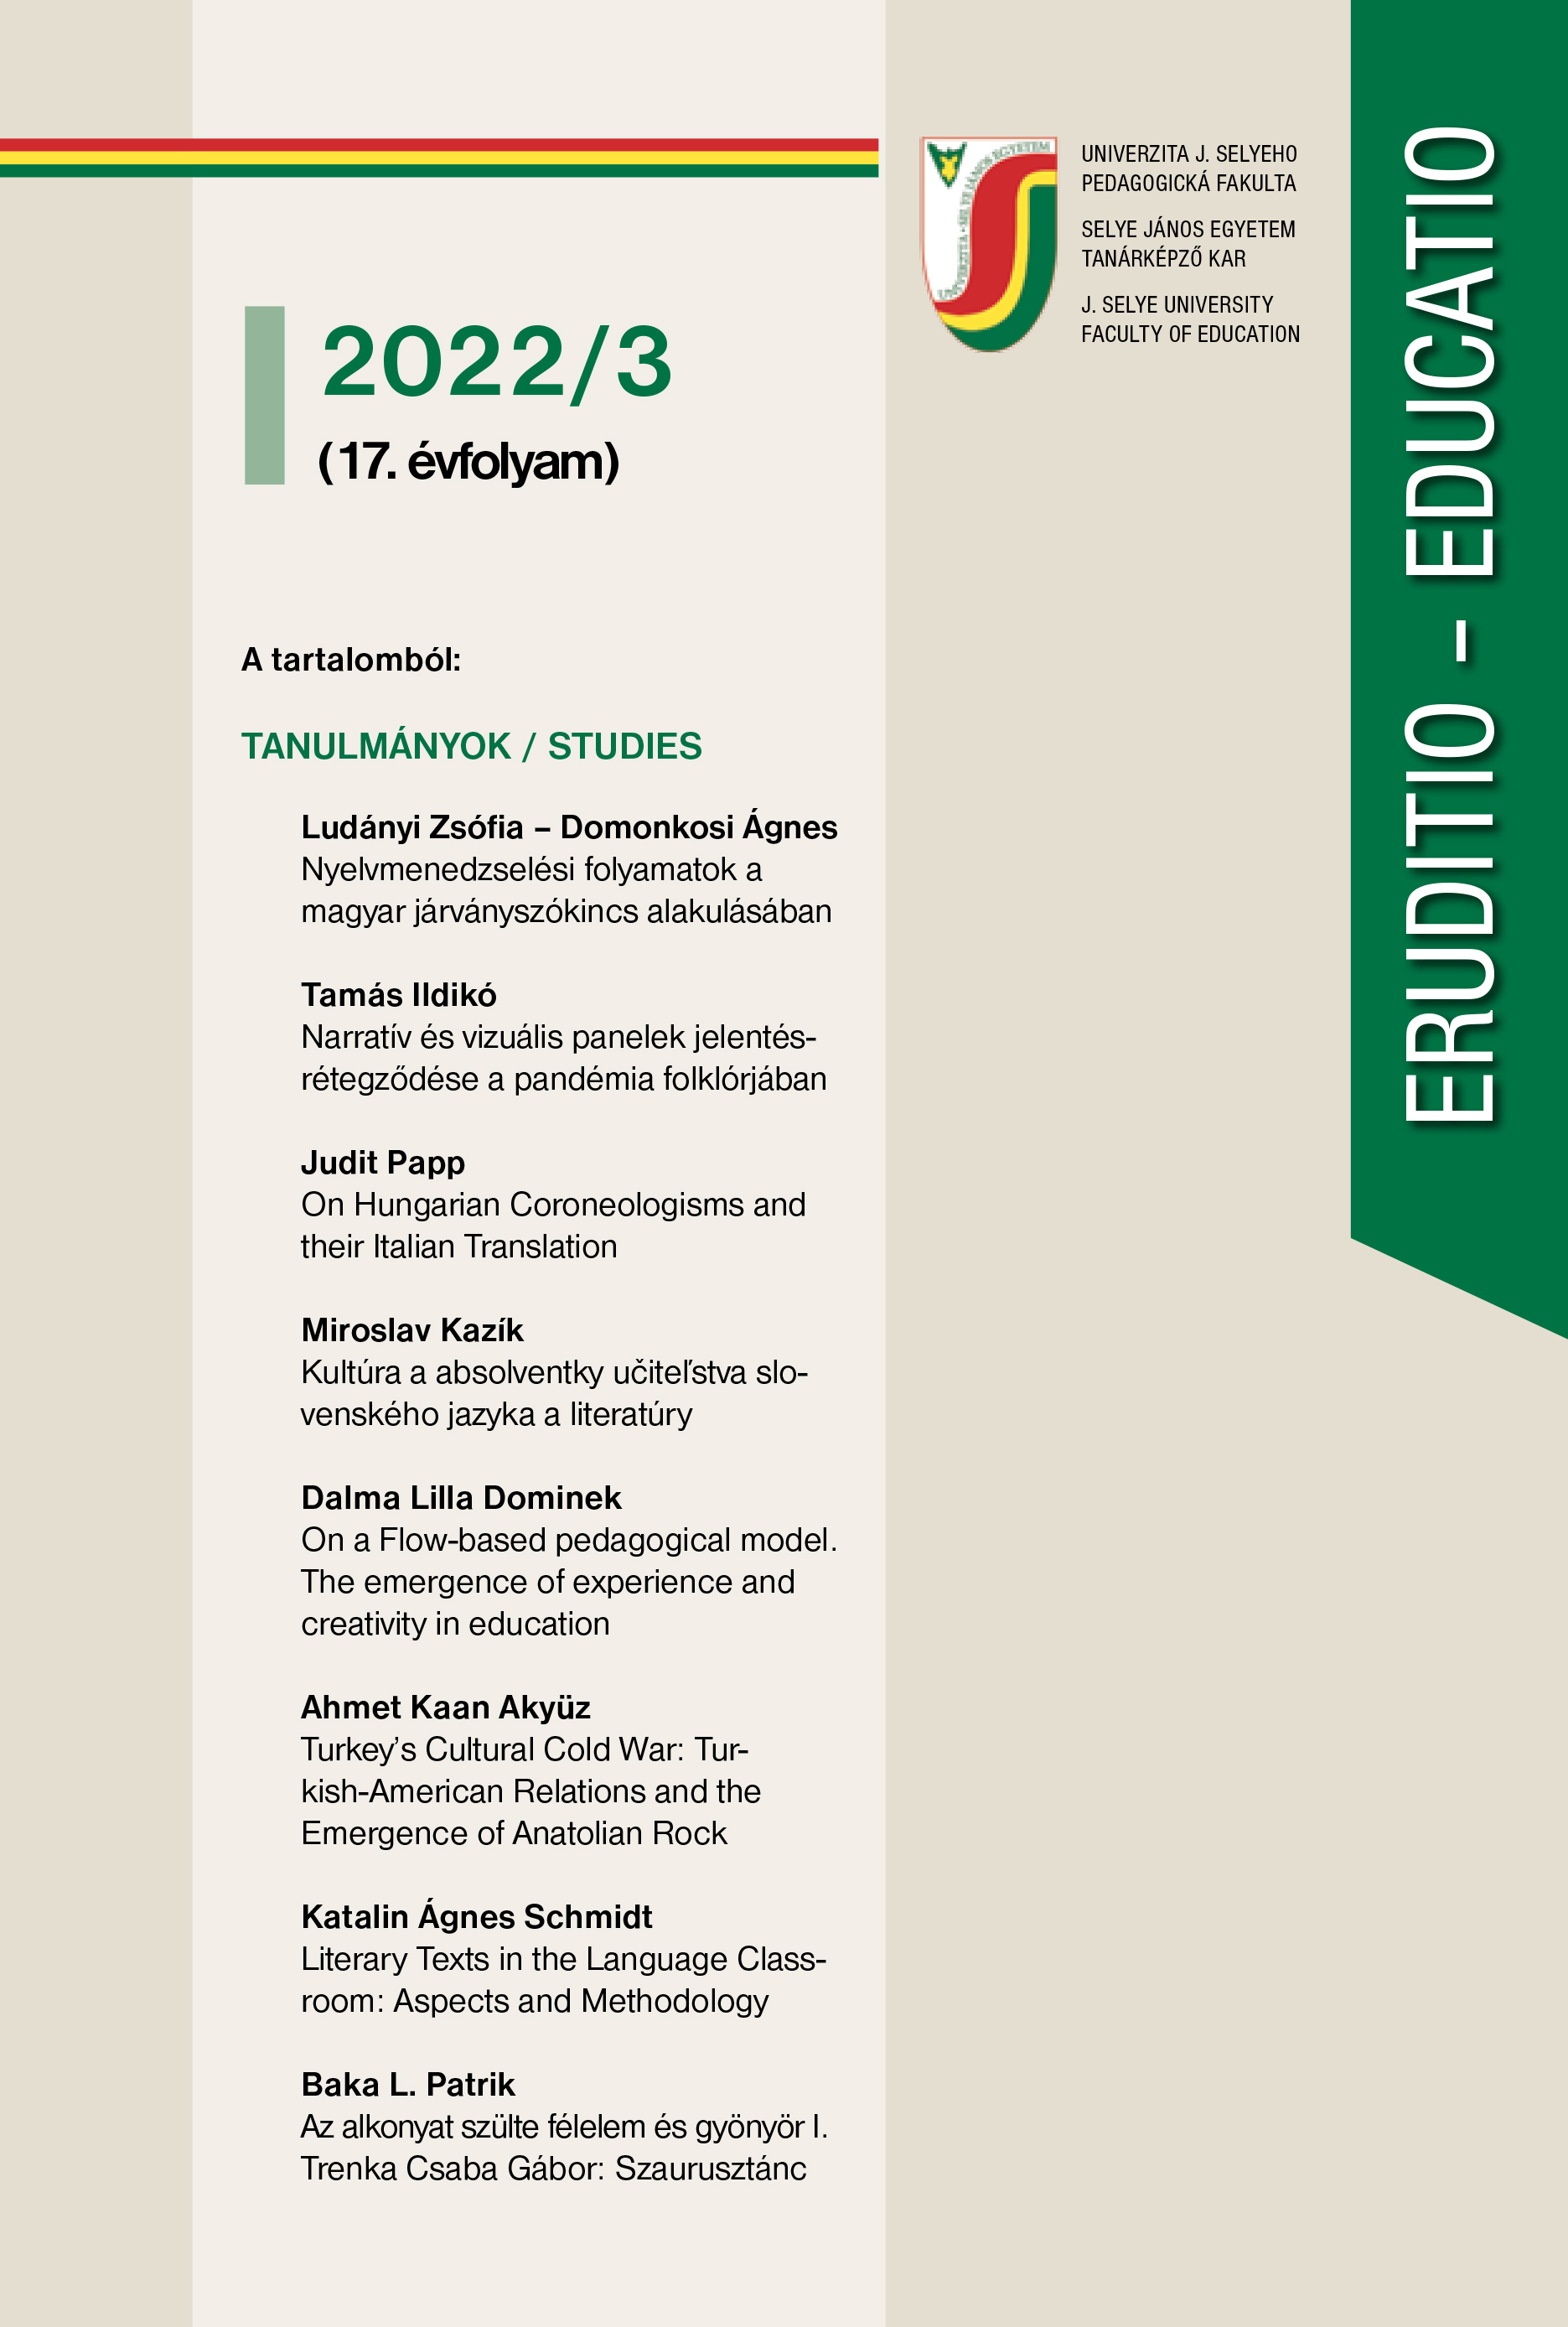 Language management processes in the development of Hungarian vocabulary during the Covid-19 period Cover Image